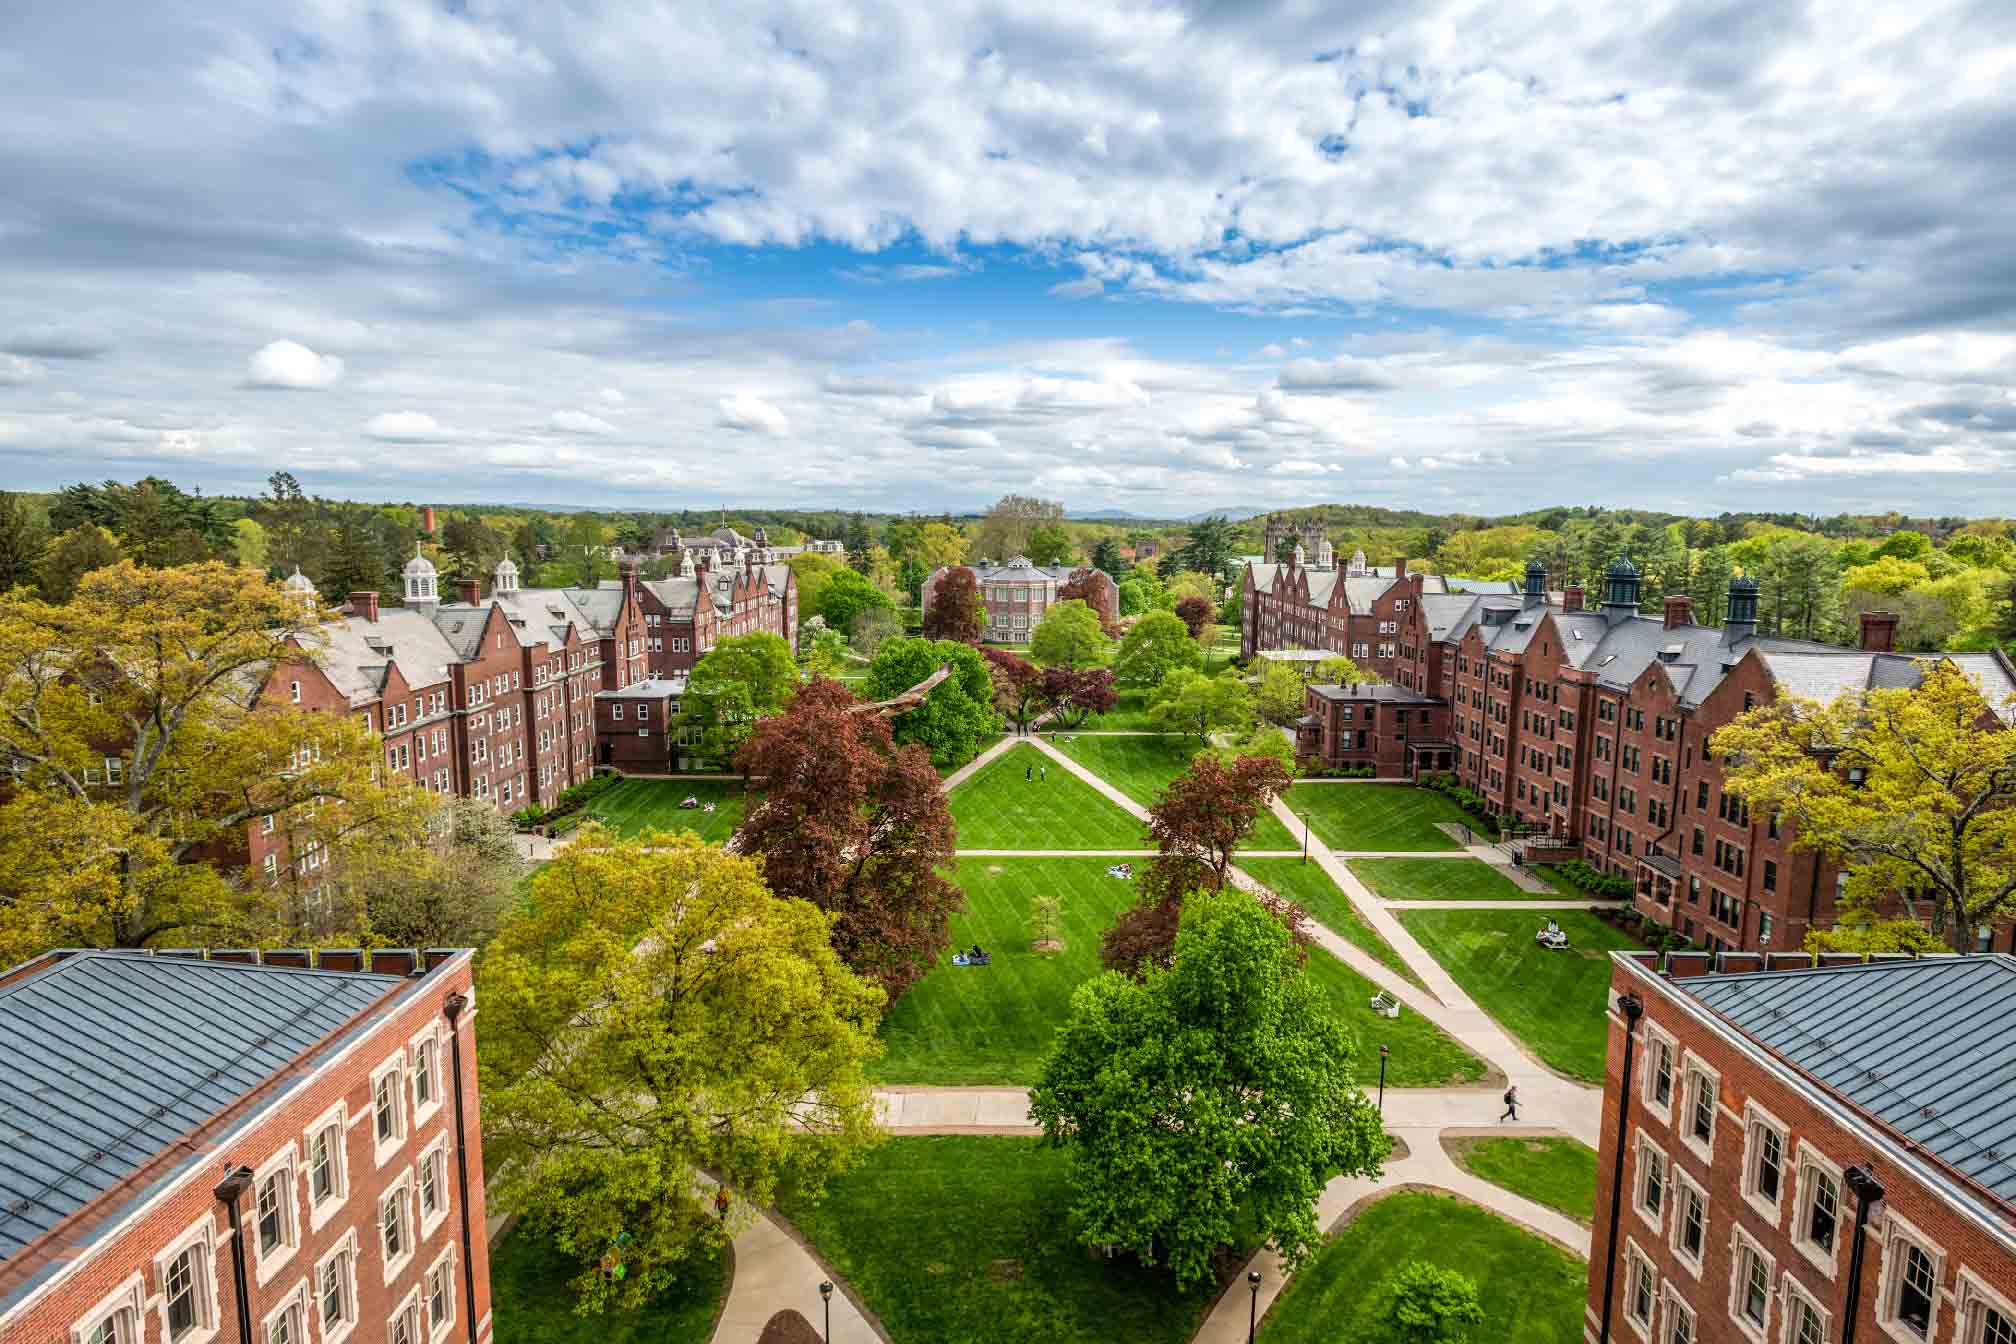 Aerial view of the Vassar campus residential quad featuring traditional red brick buildings with white trimmings,  lush green lawns, and concrete paths crisscrossing the lawns, leading to various buildings.